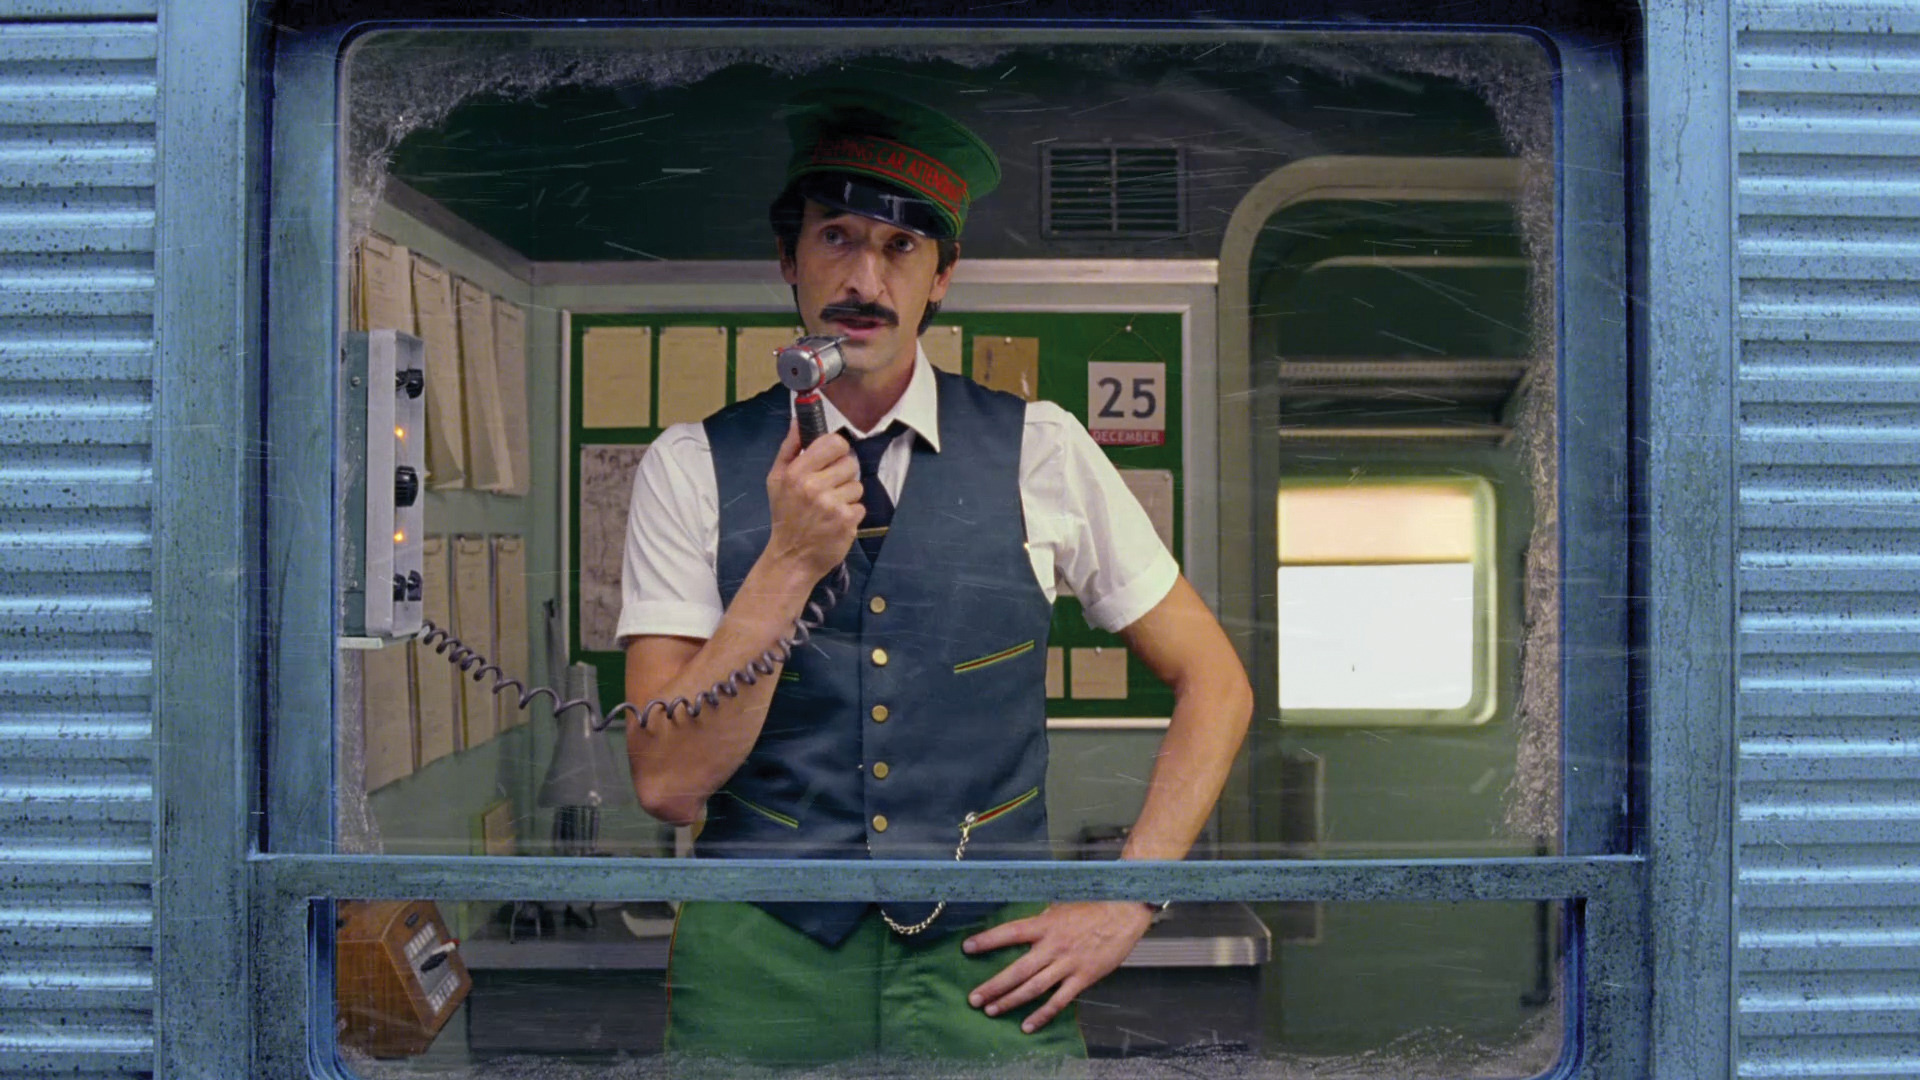 Filmmaker Wes Anderson Designed a Real Train Car You Can Ride In